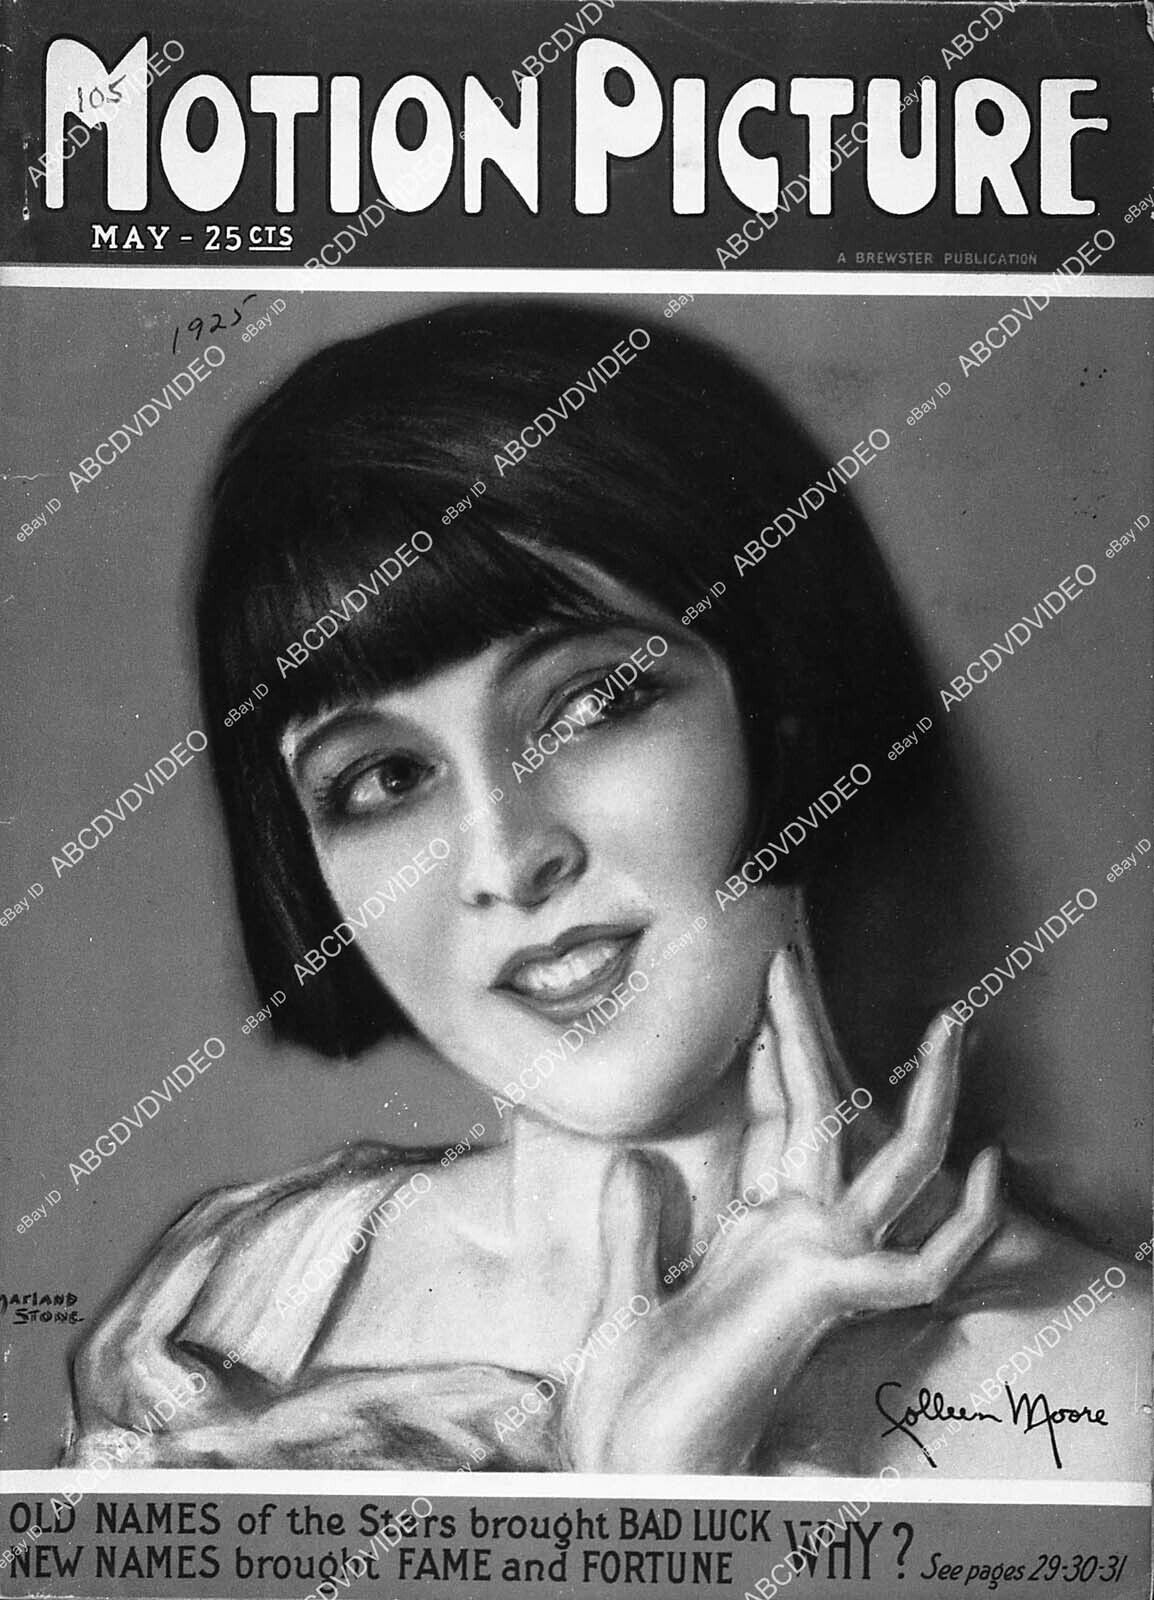 6444-009 Colleen Moore Motion Picture magazine cover 6444-009 6444-009